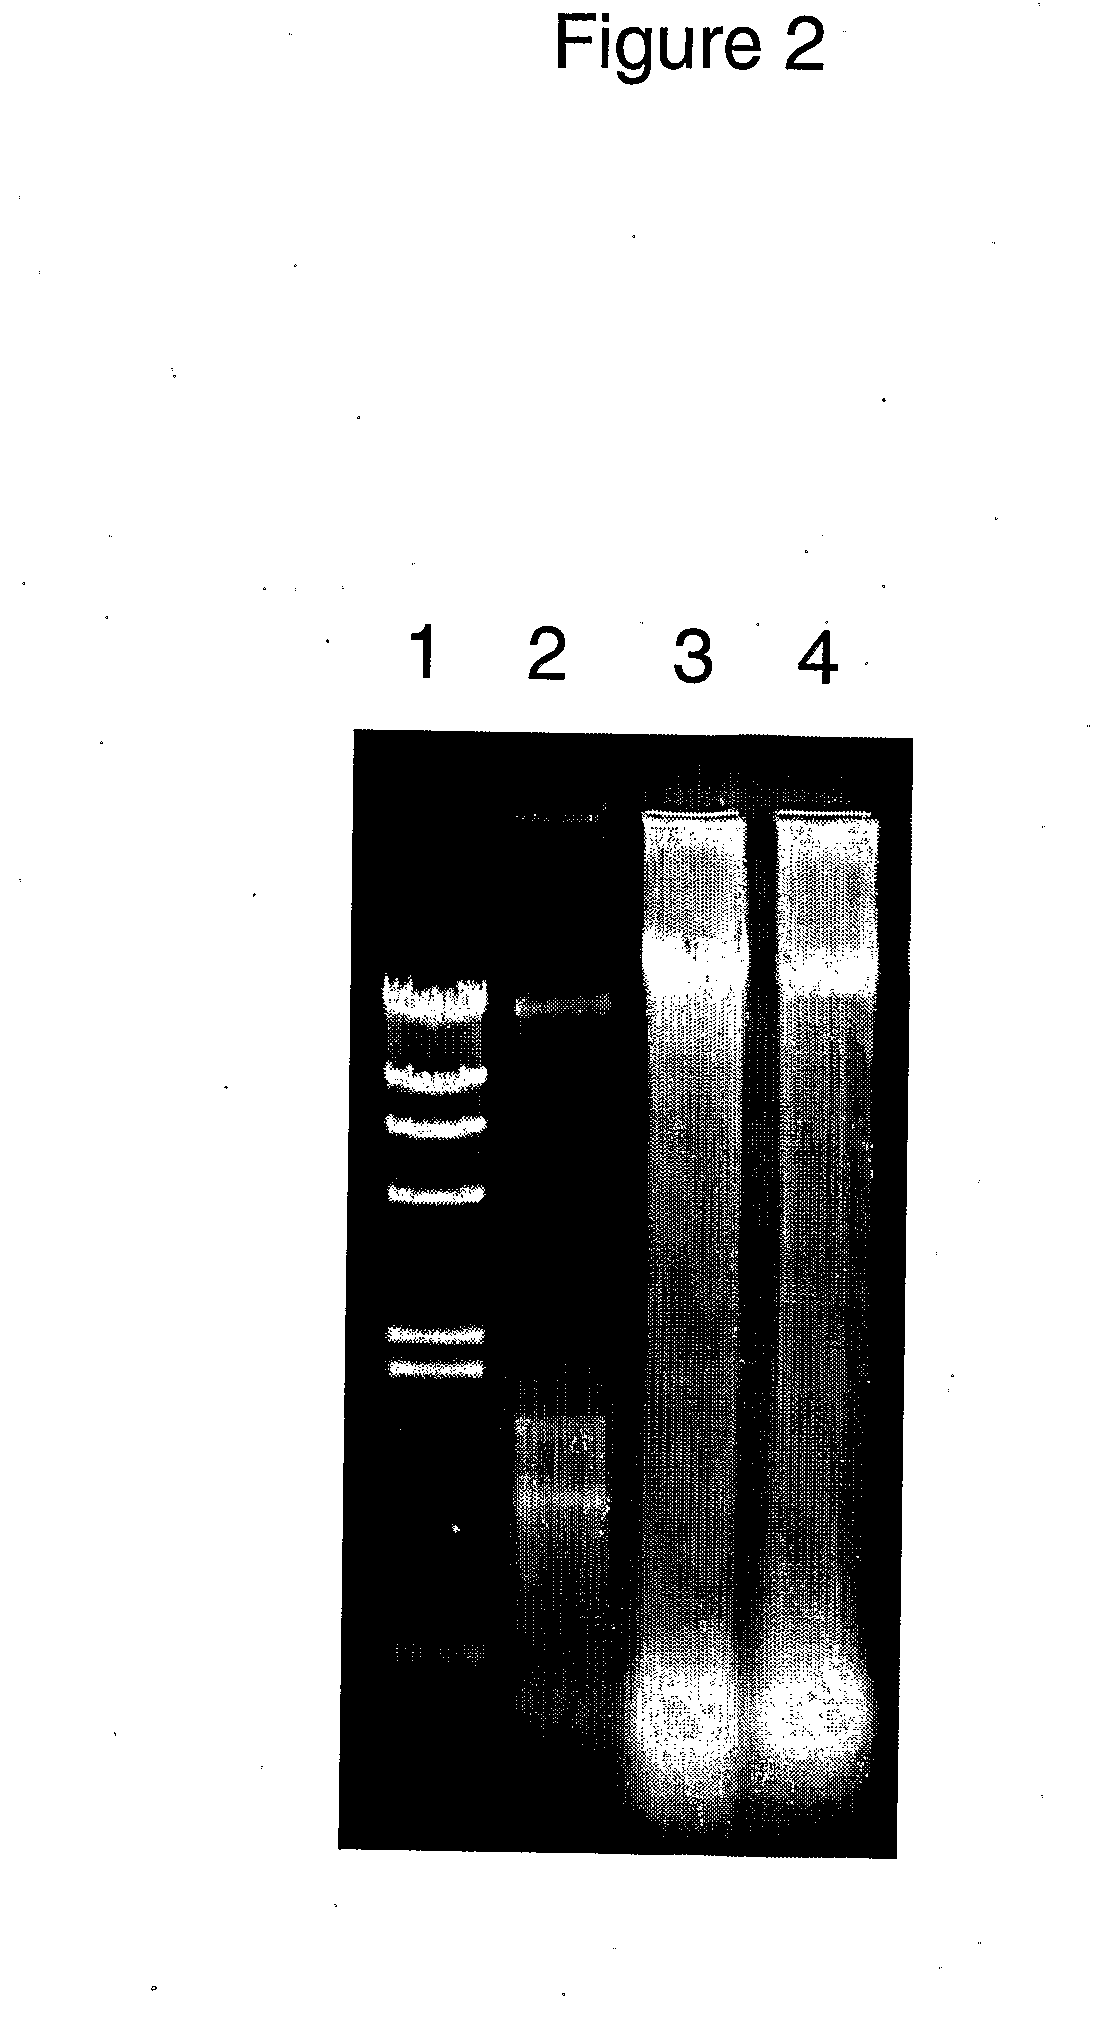 Stabilizing compositions and methods for extraction of ribonucleic acid